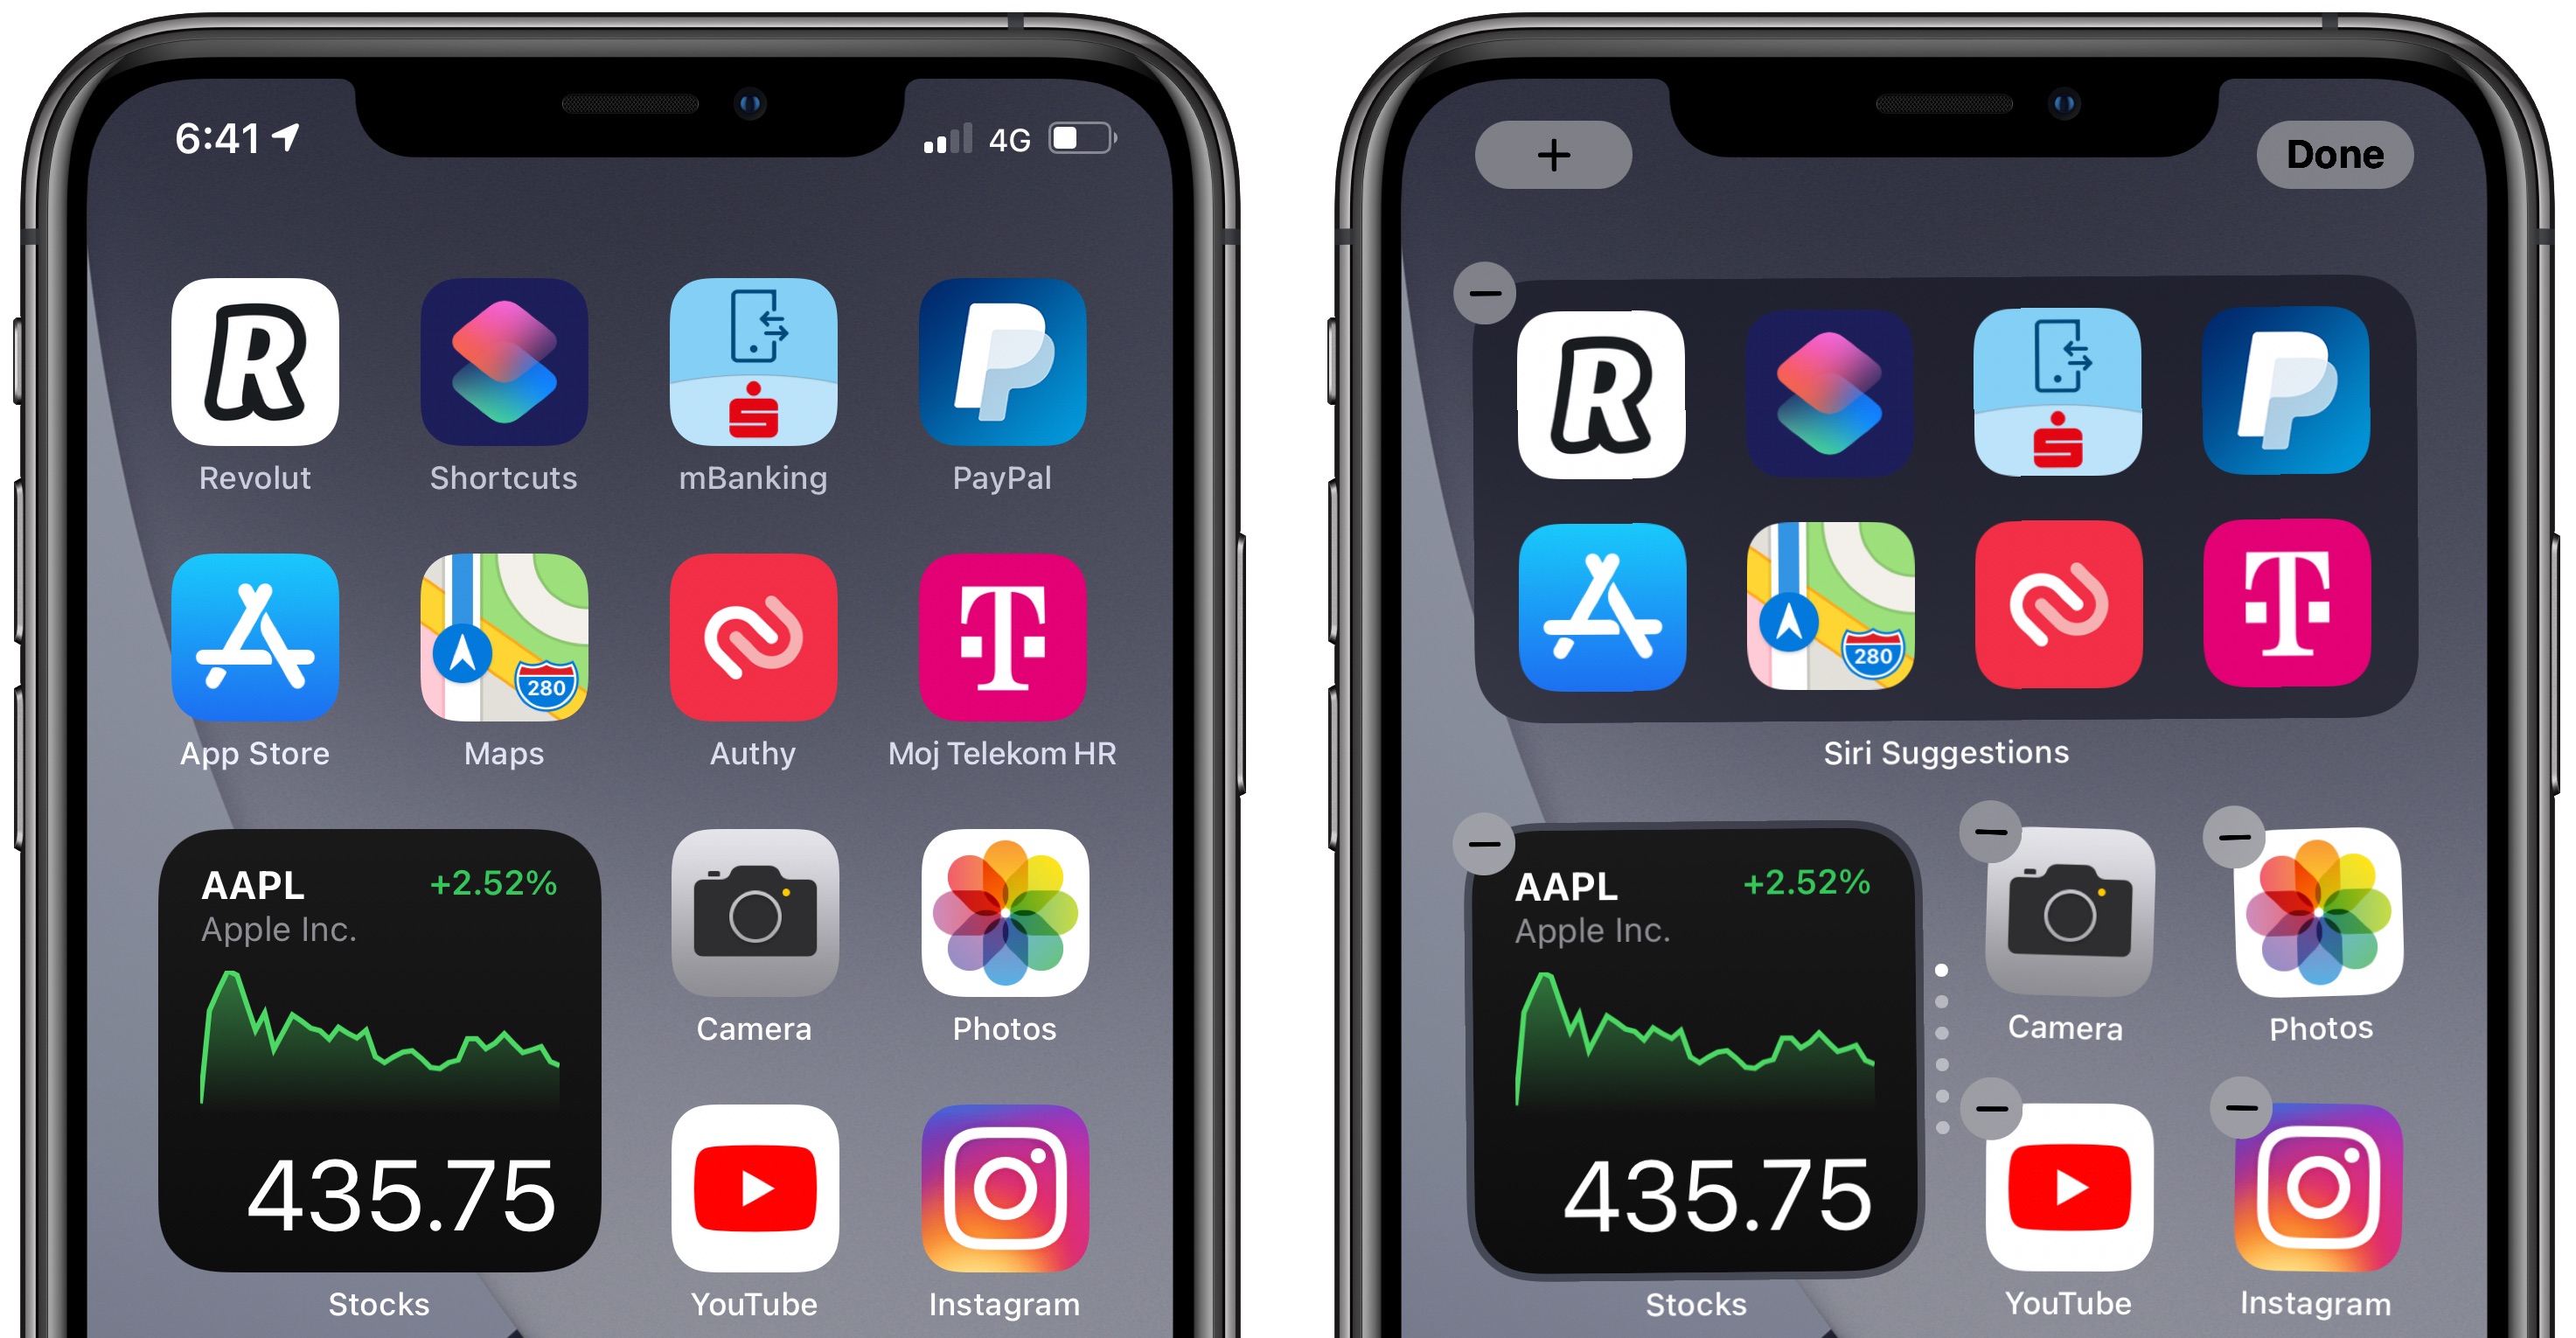 Siri Suggestions widget - an example of suggested apps on the Home screen